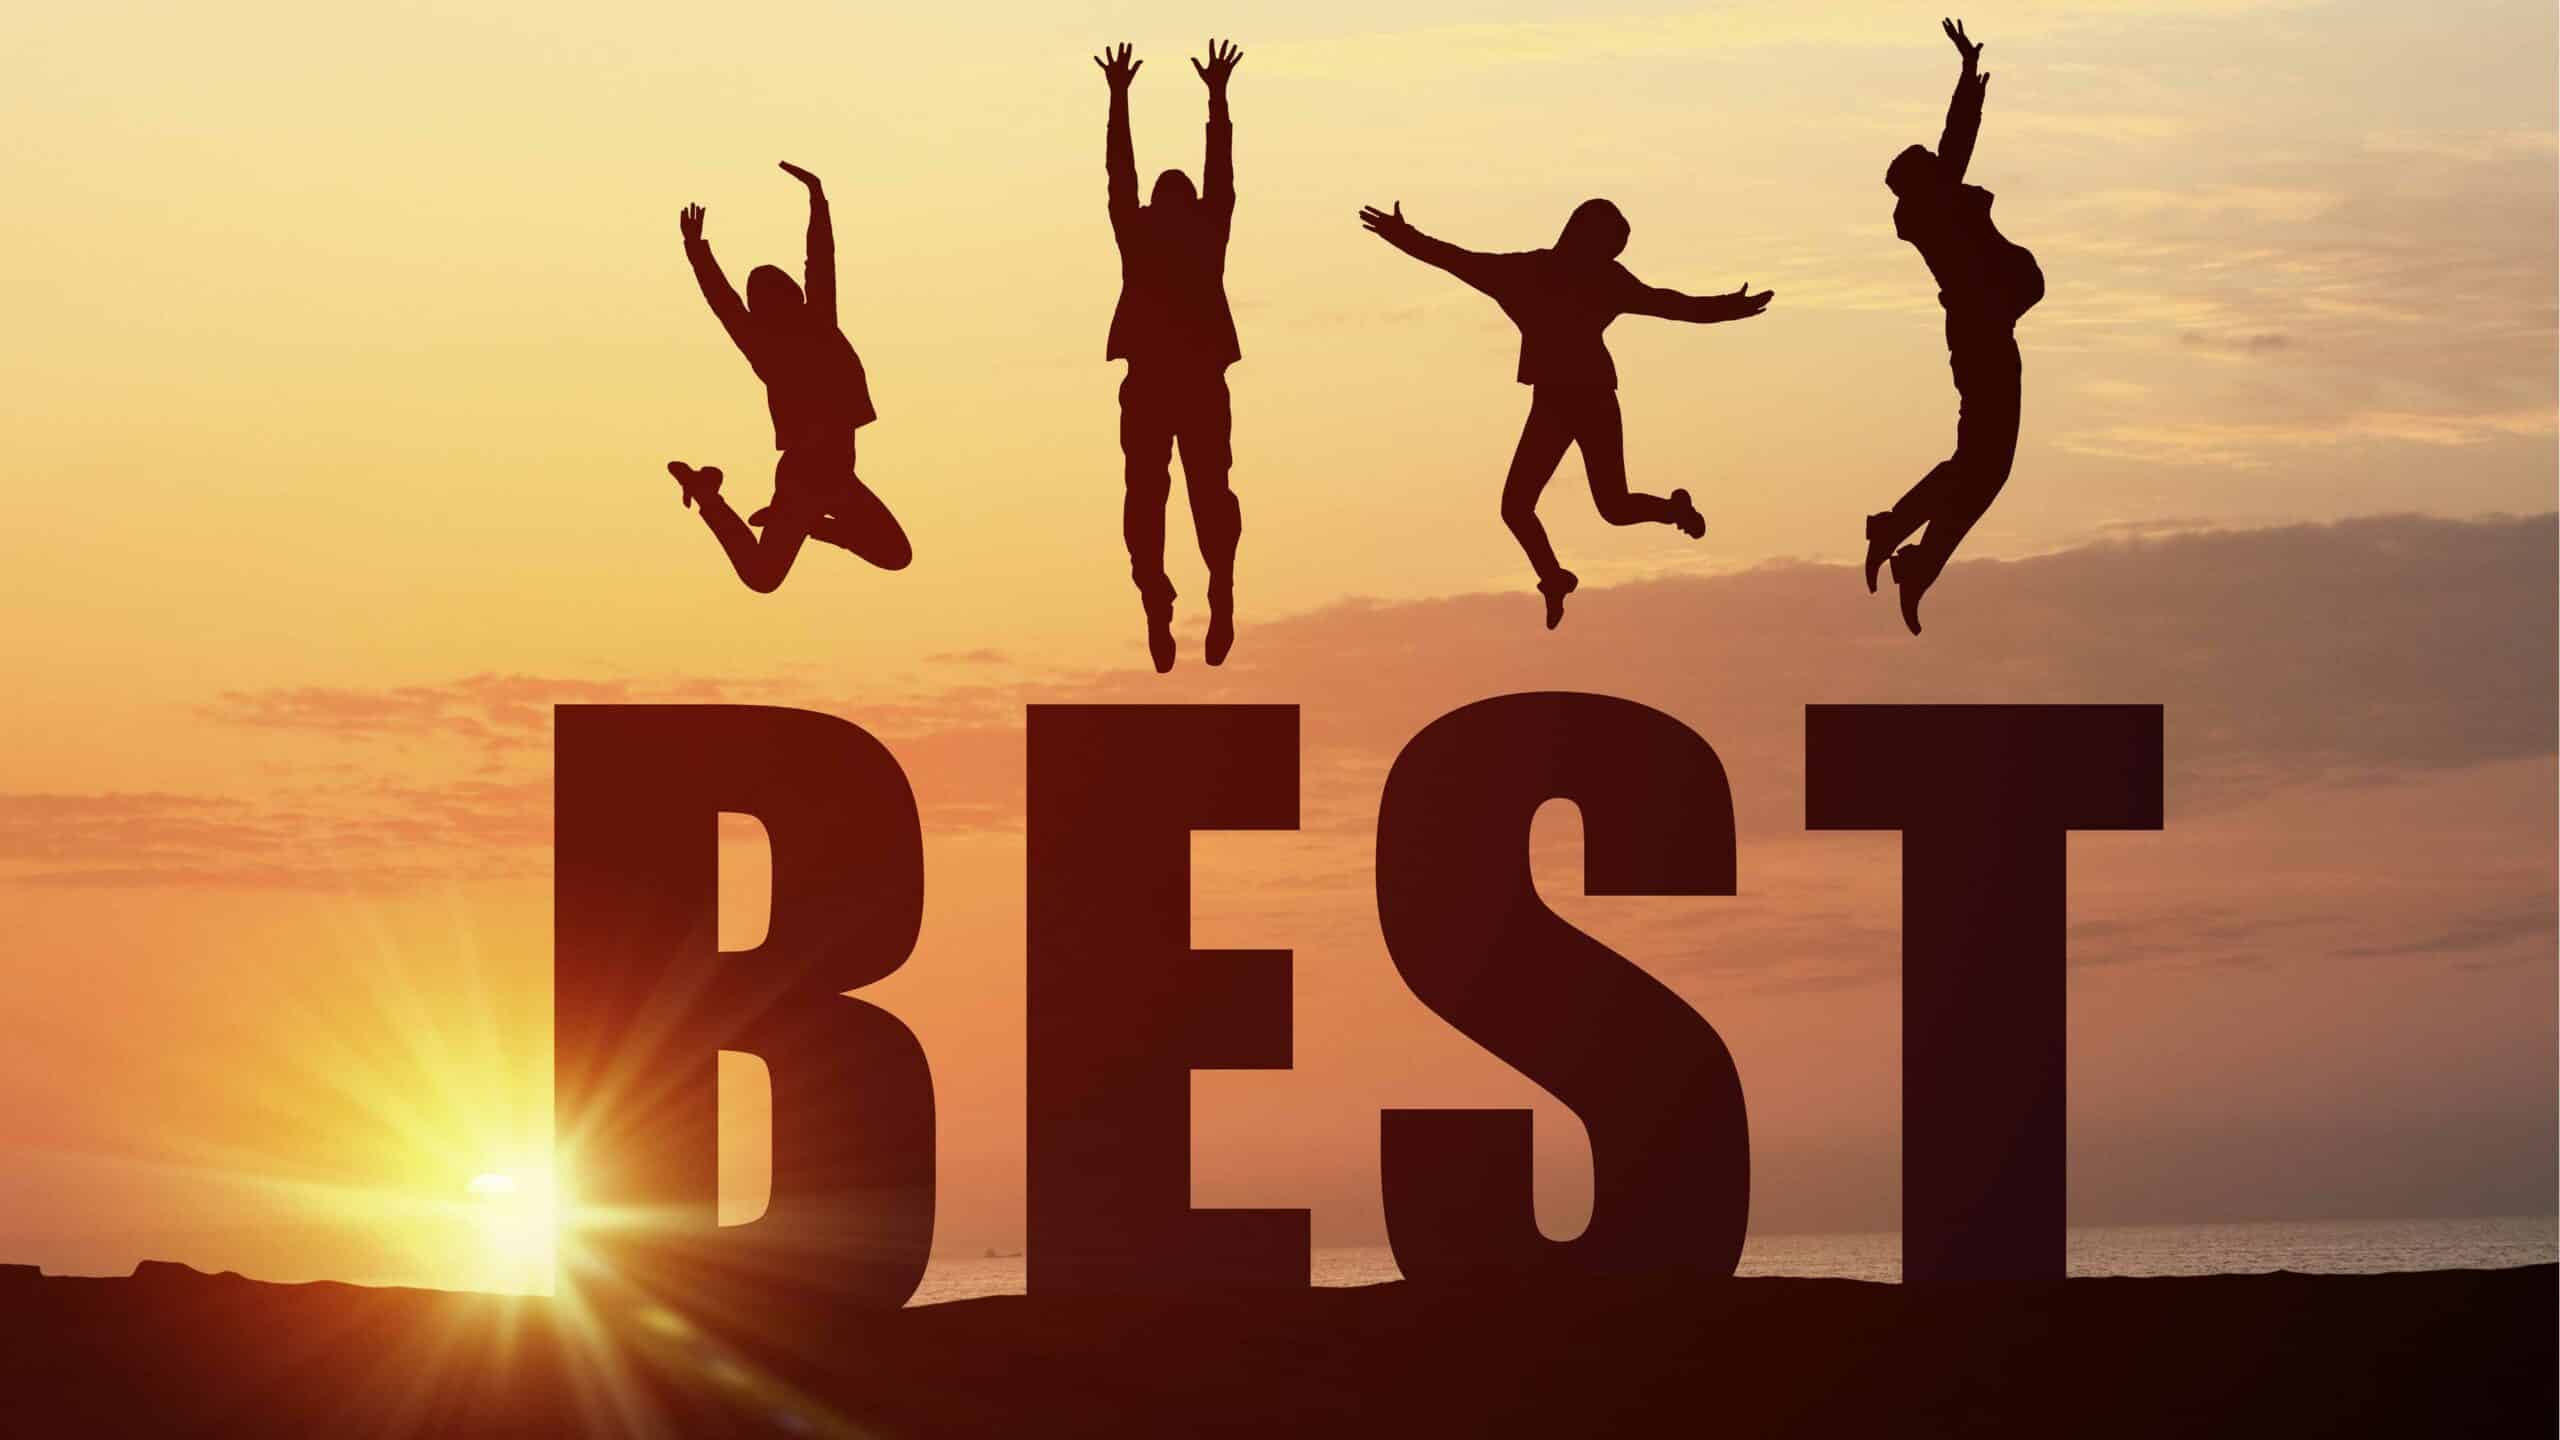 The best of good love gone. The best картинки. The best надпись. Надпись best of the best. Best логотип.